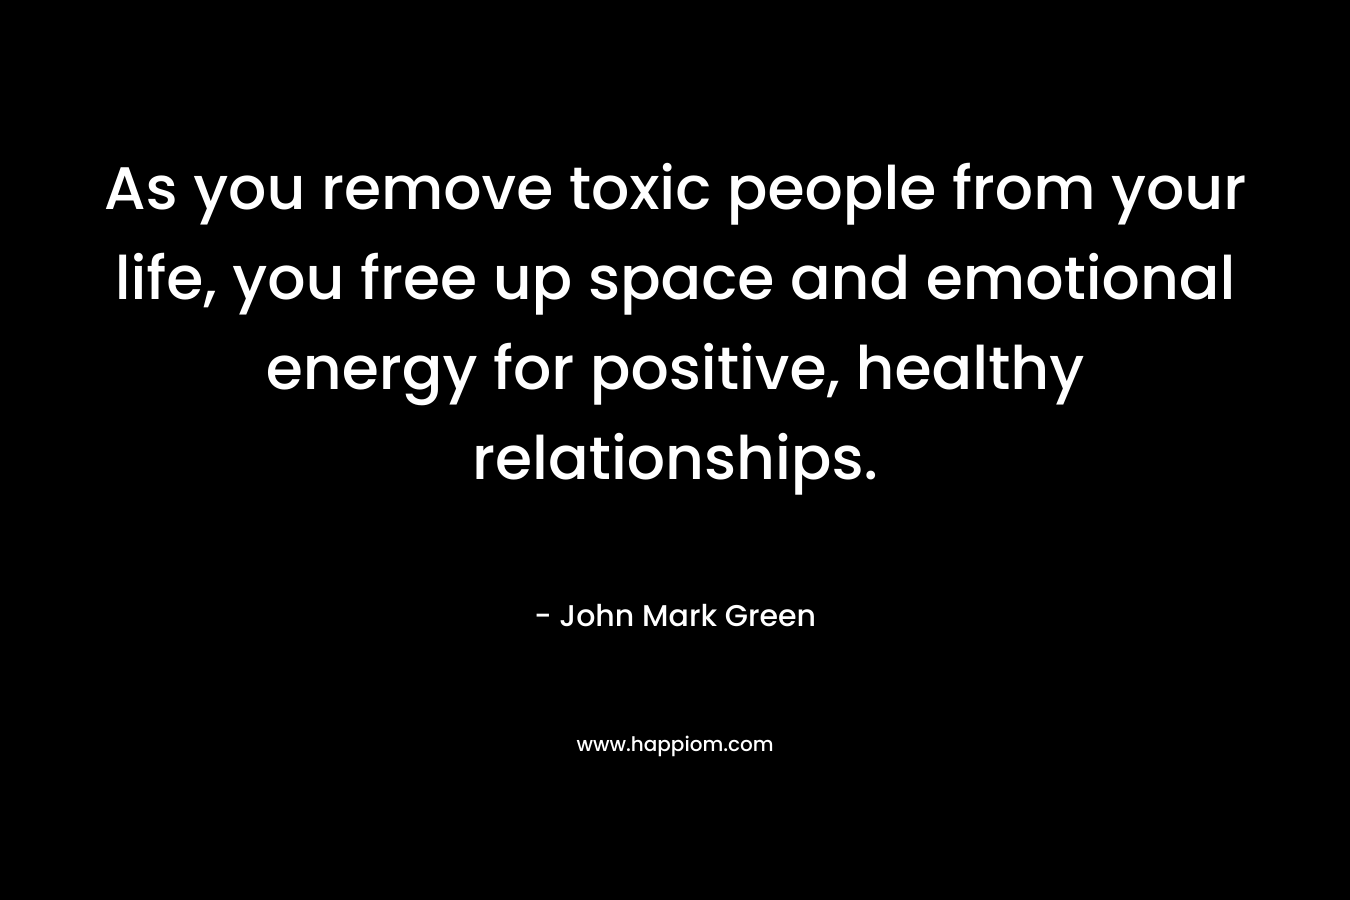 As you remove toxic people from your life, you free up space and emotional energy for positive, healthy relationships. – John Mark Green